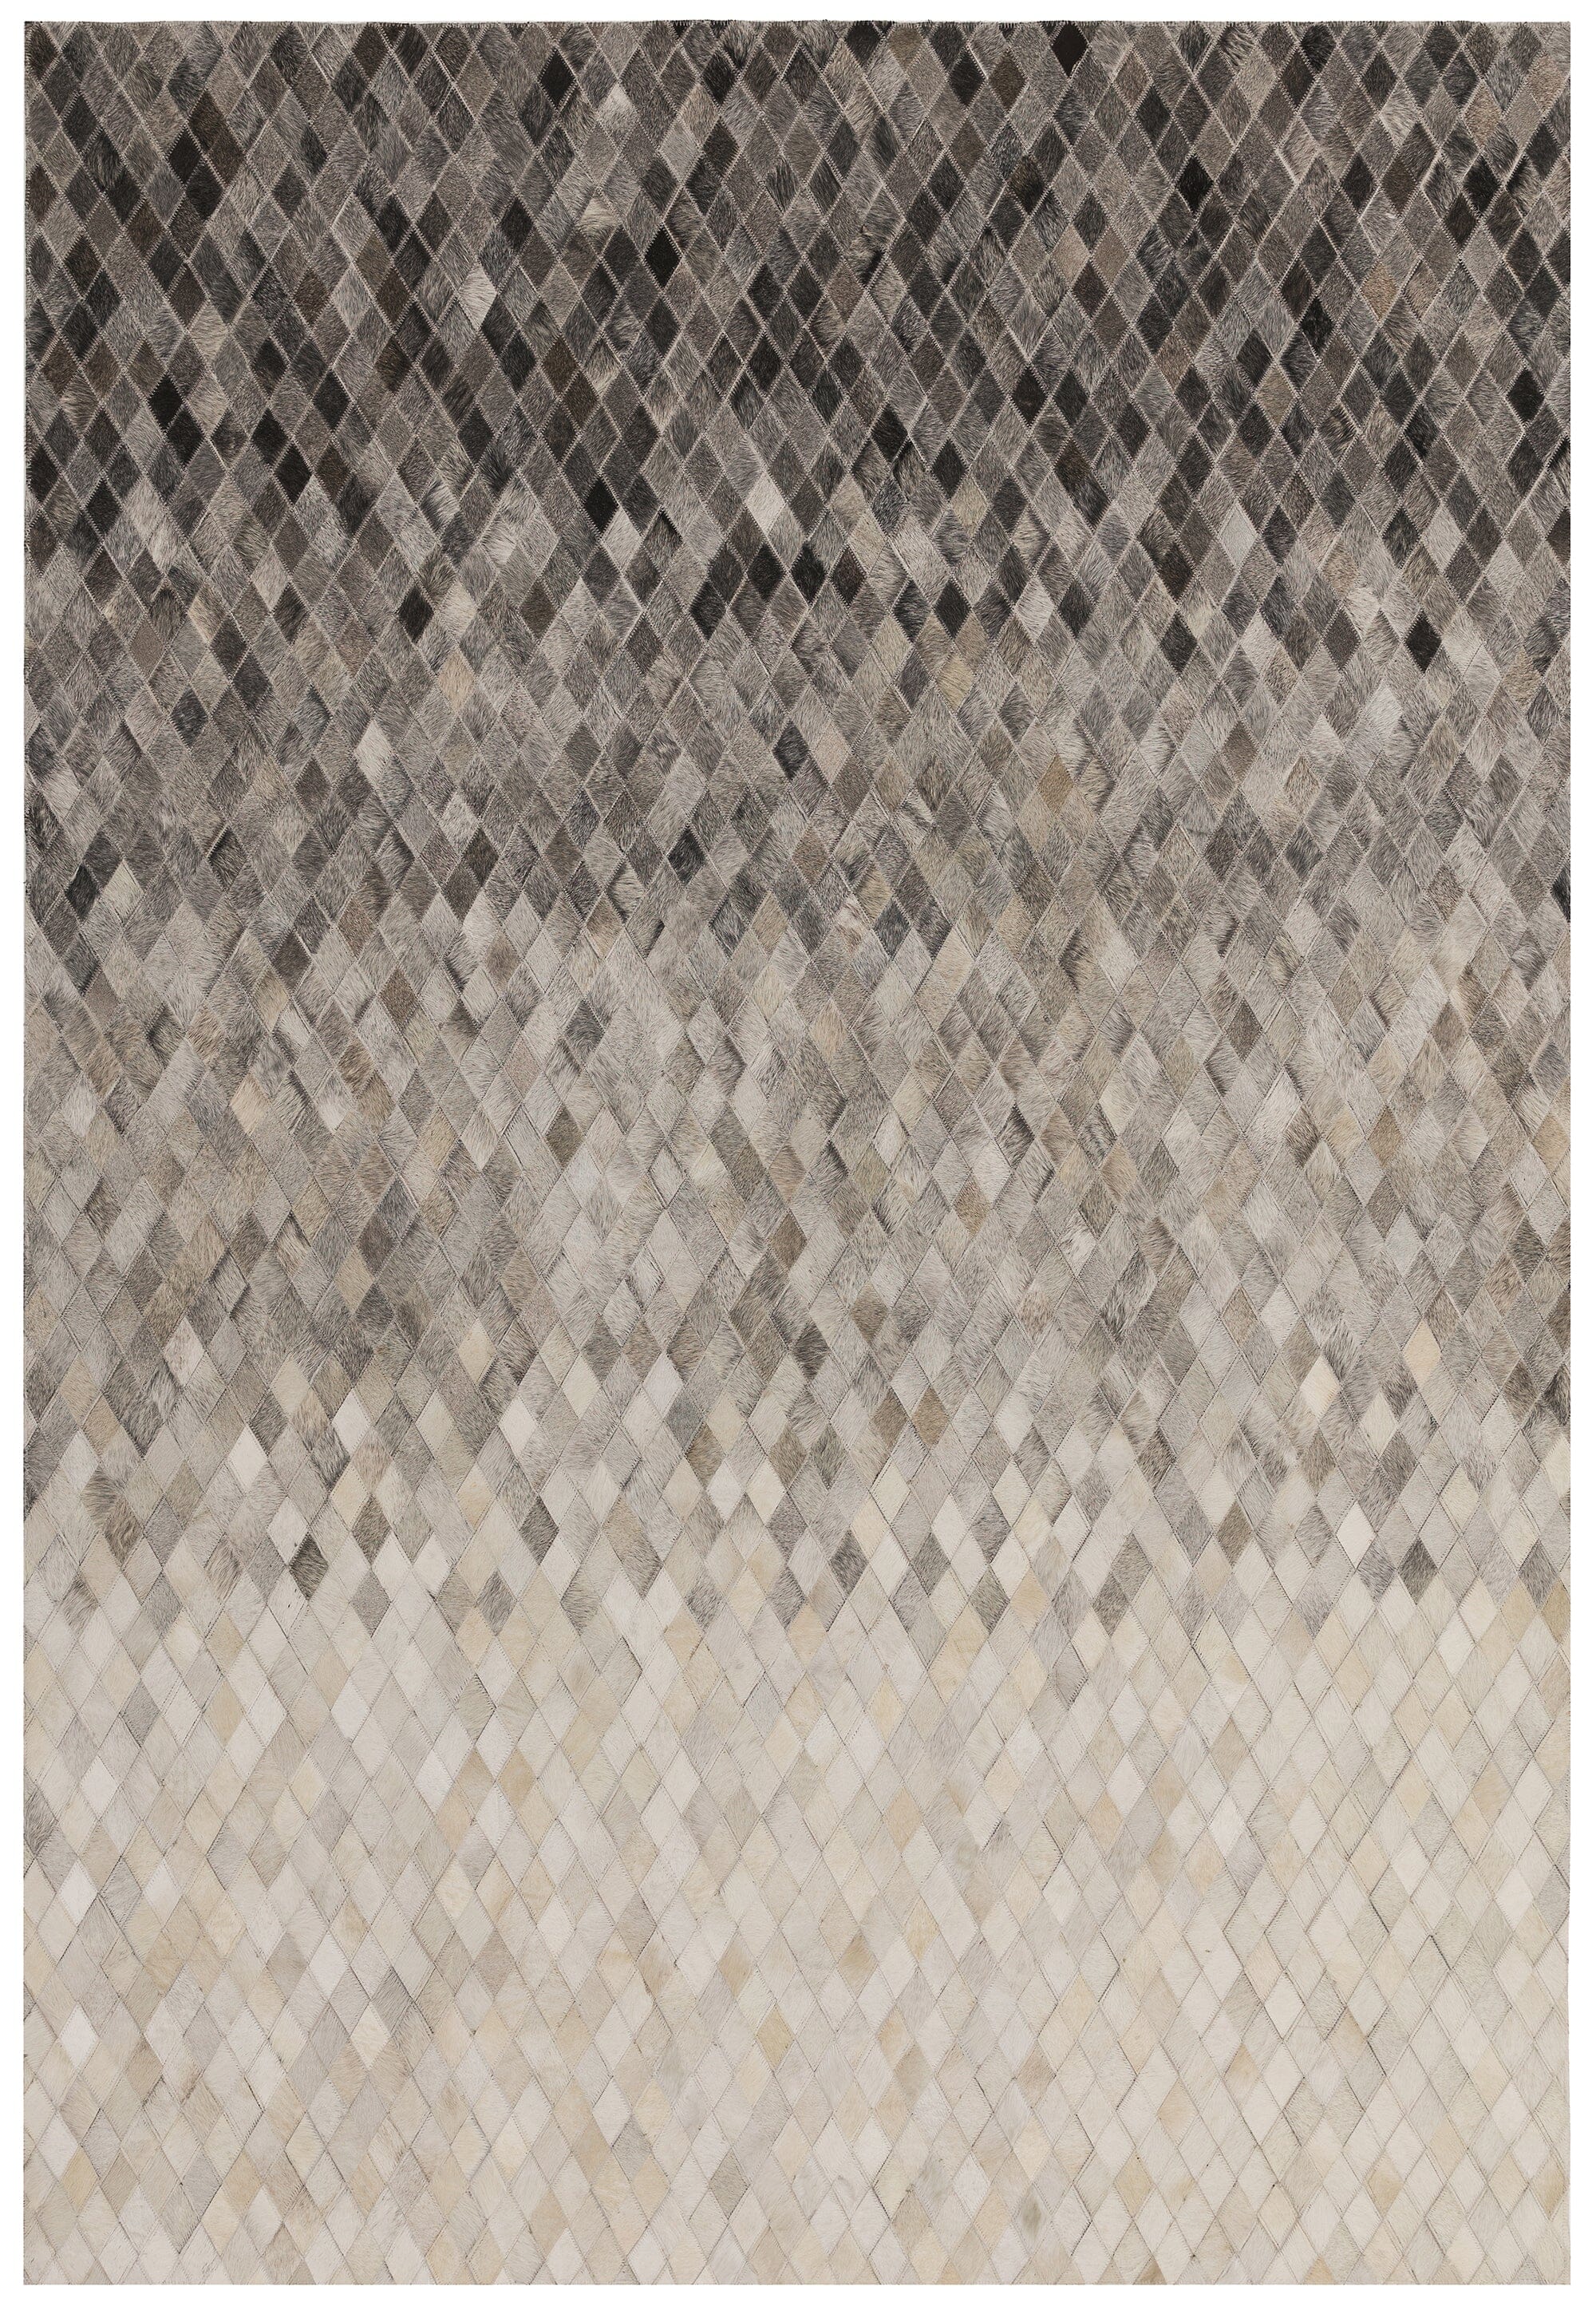 Gaucho Diamond Ombre Cowhide Leather Rug